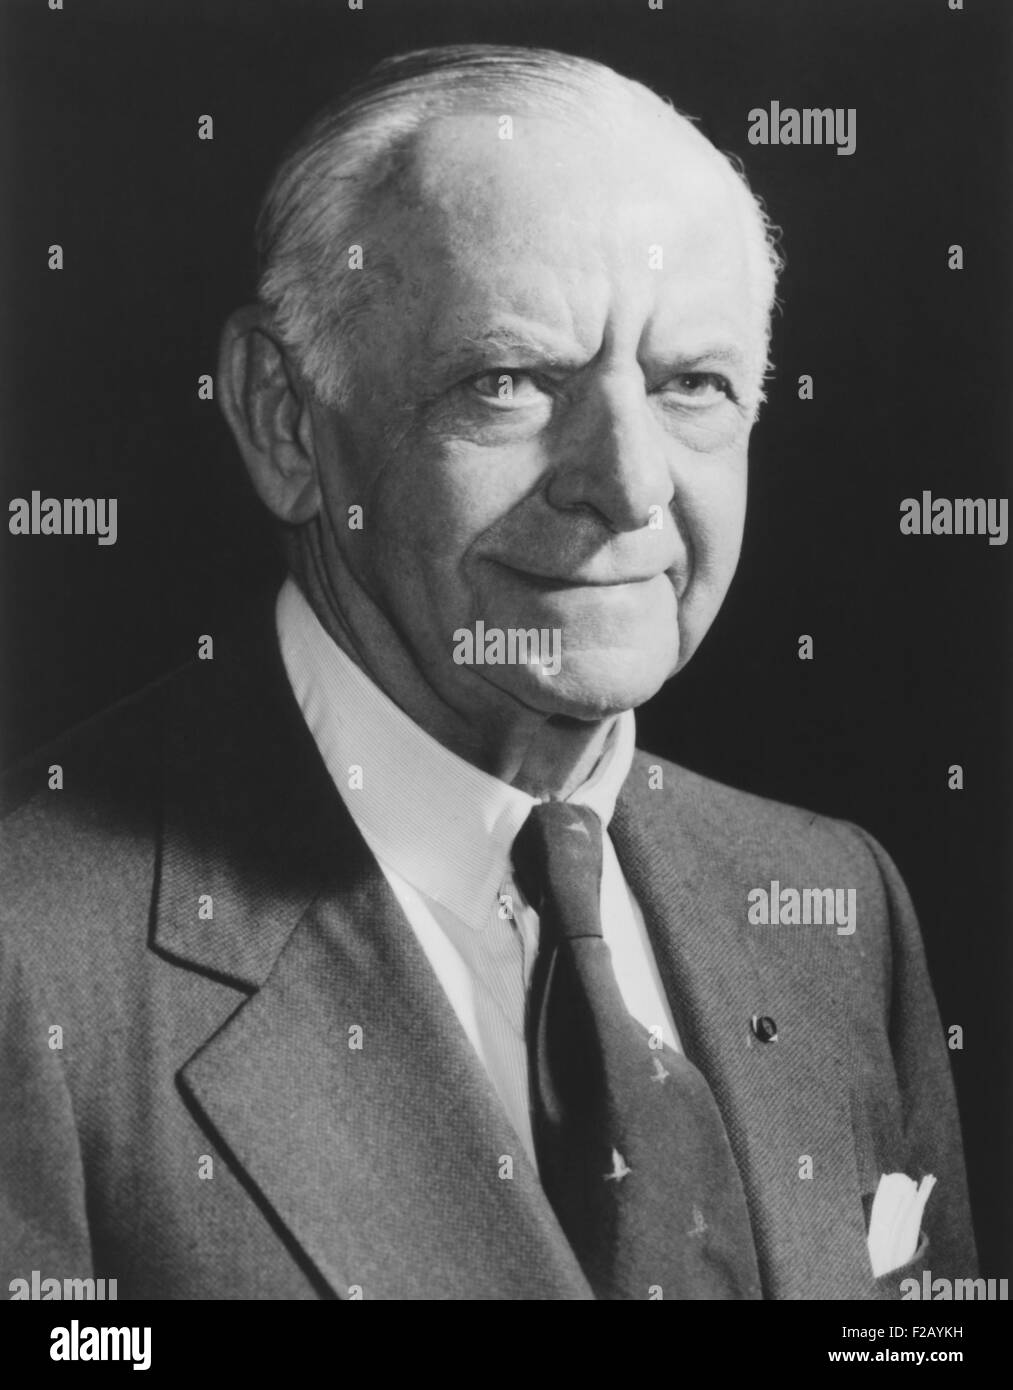 Dr. Armand Hammer, President and CEO of Occidental Petroleum, a company he led from 1957-1990. He maintained close business and Stock Photo